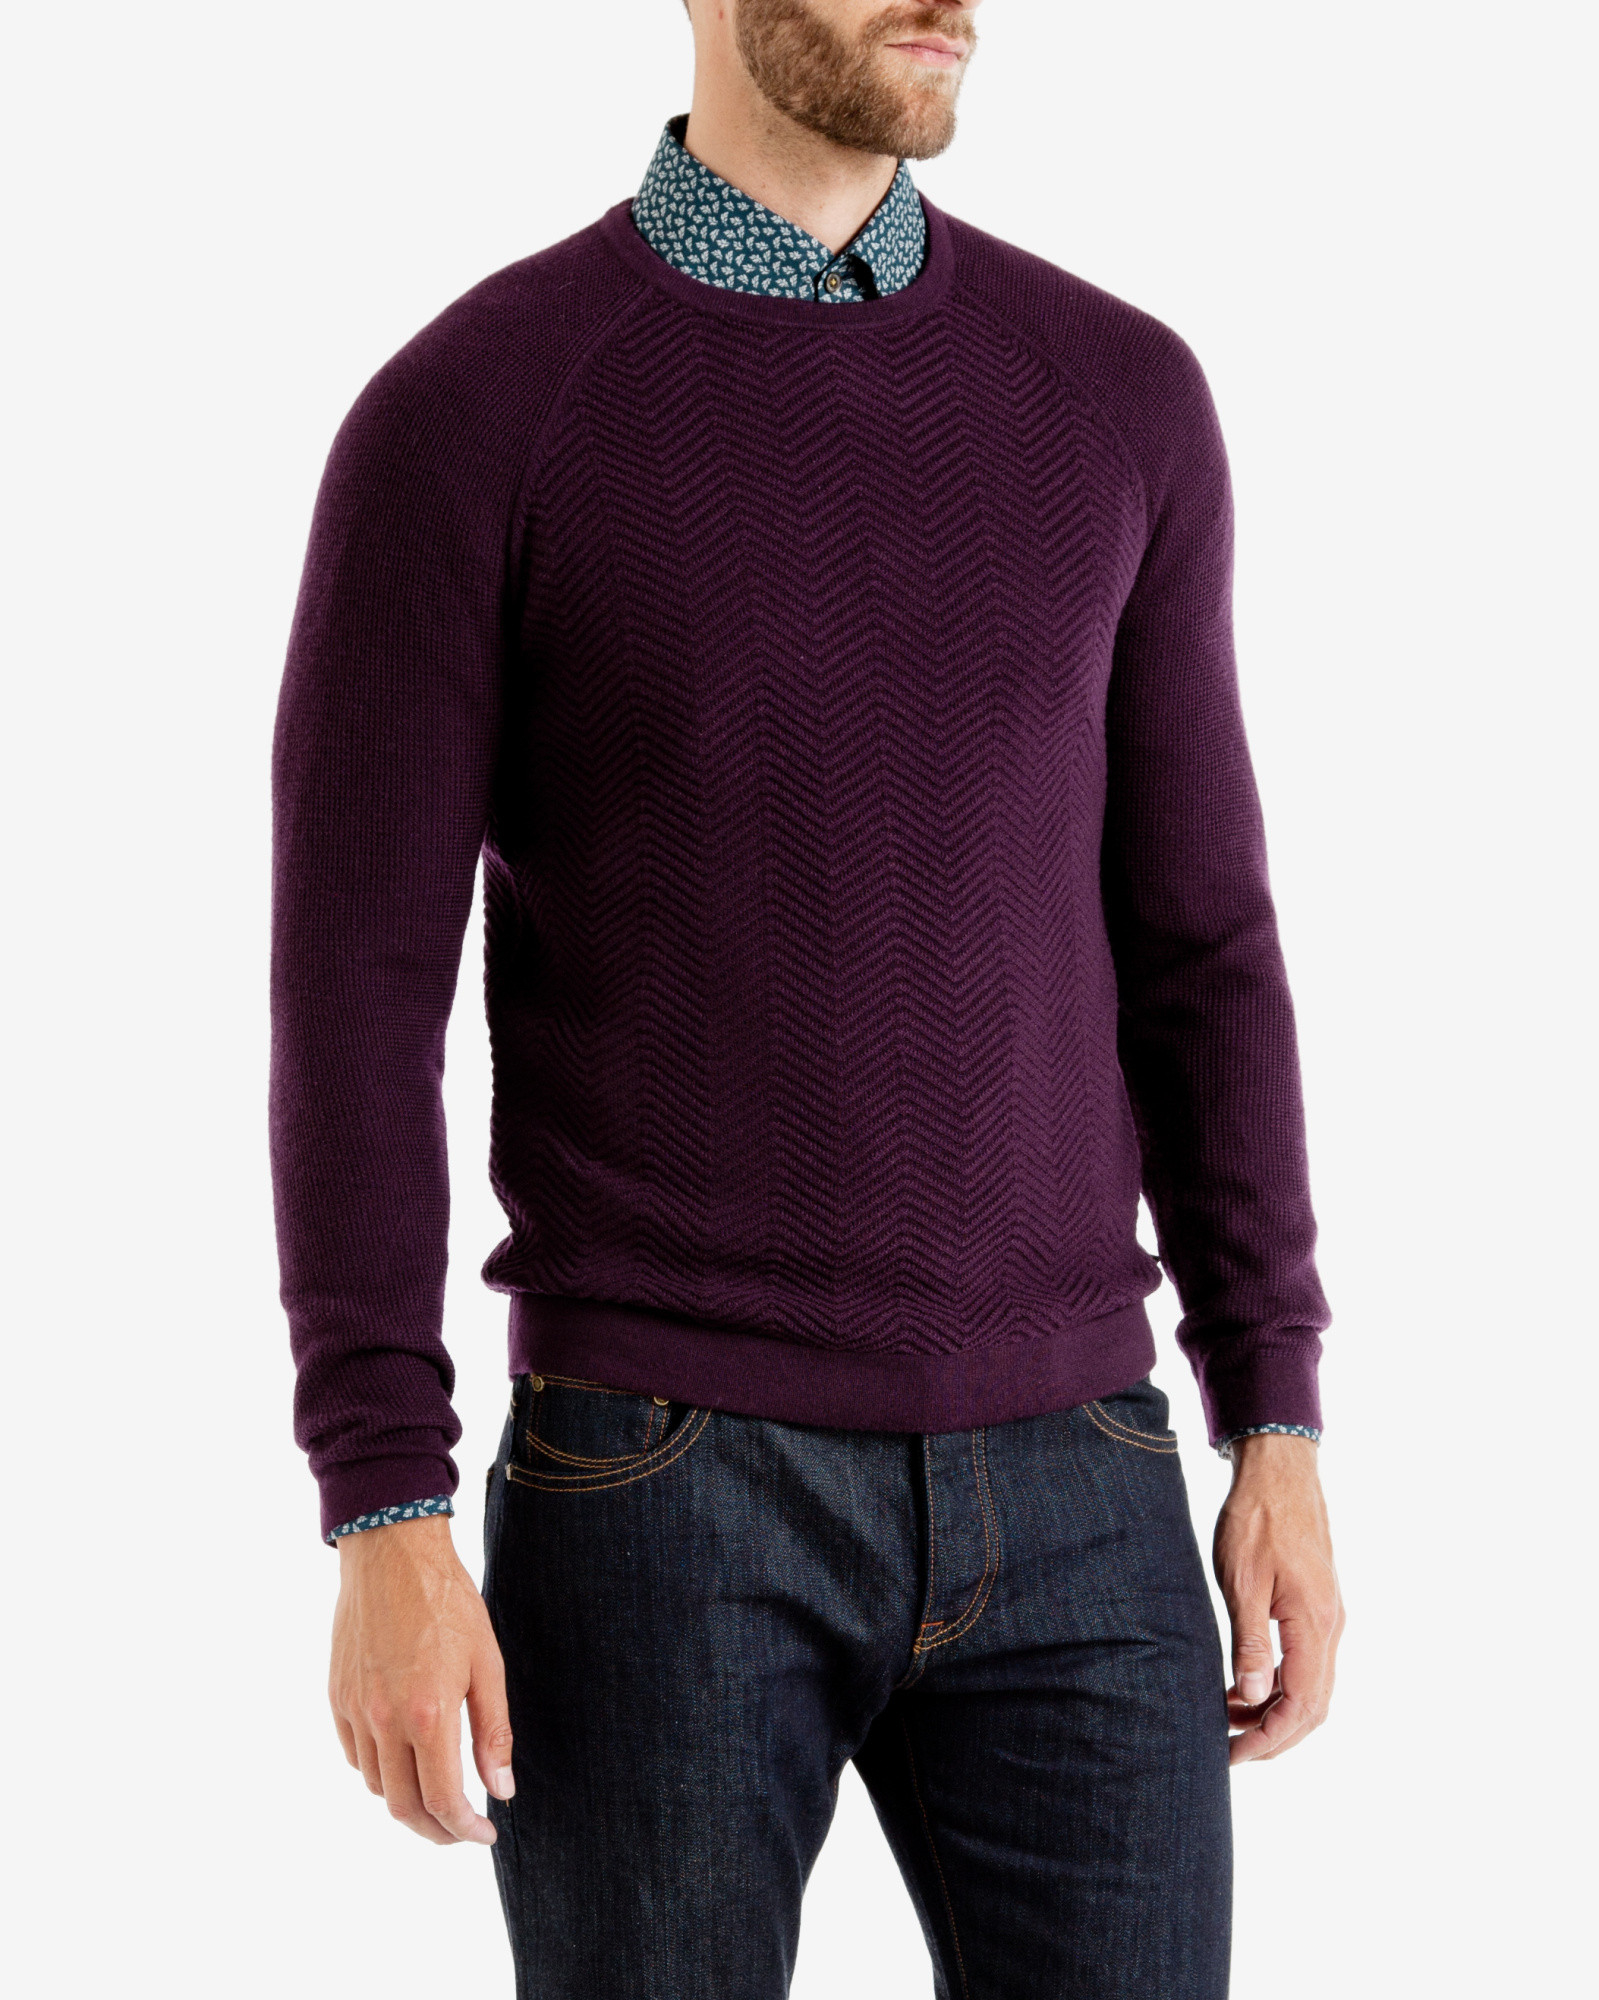 Lyst - Ted Baker Textured Wool Jumper in Purple for Men